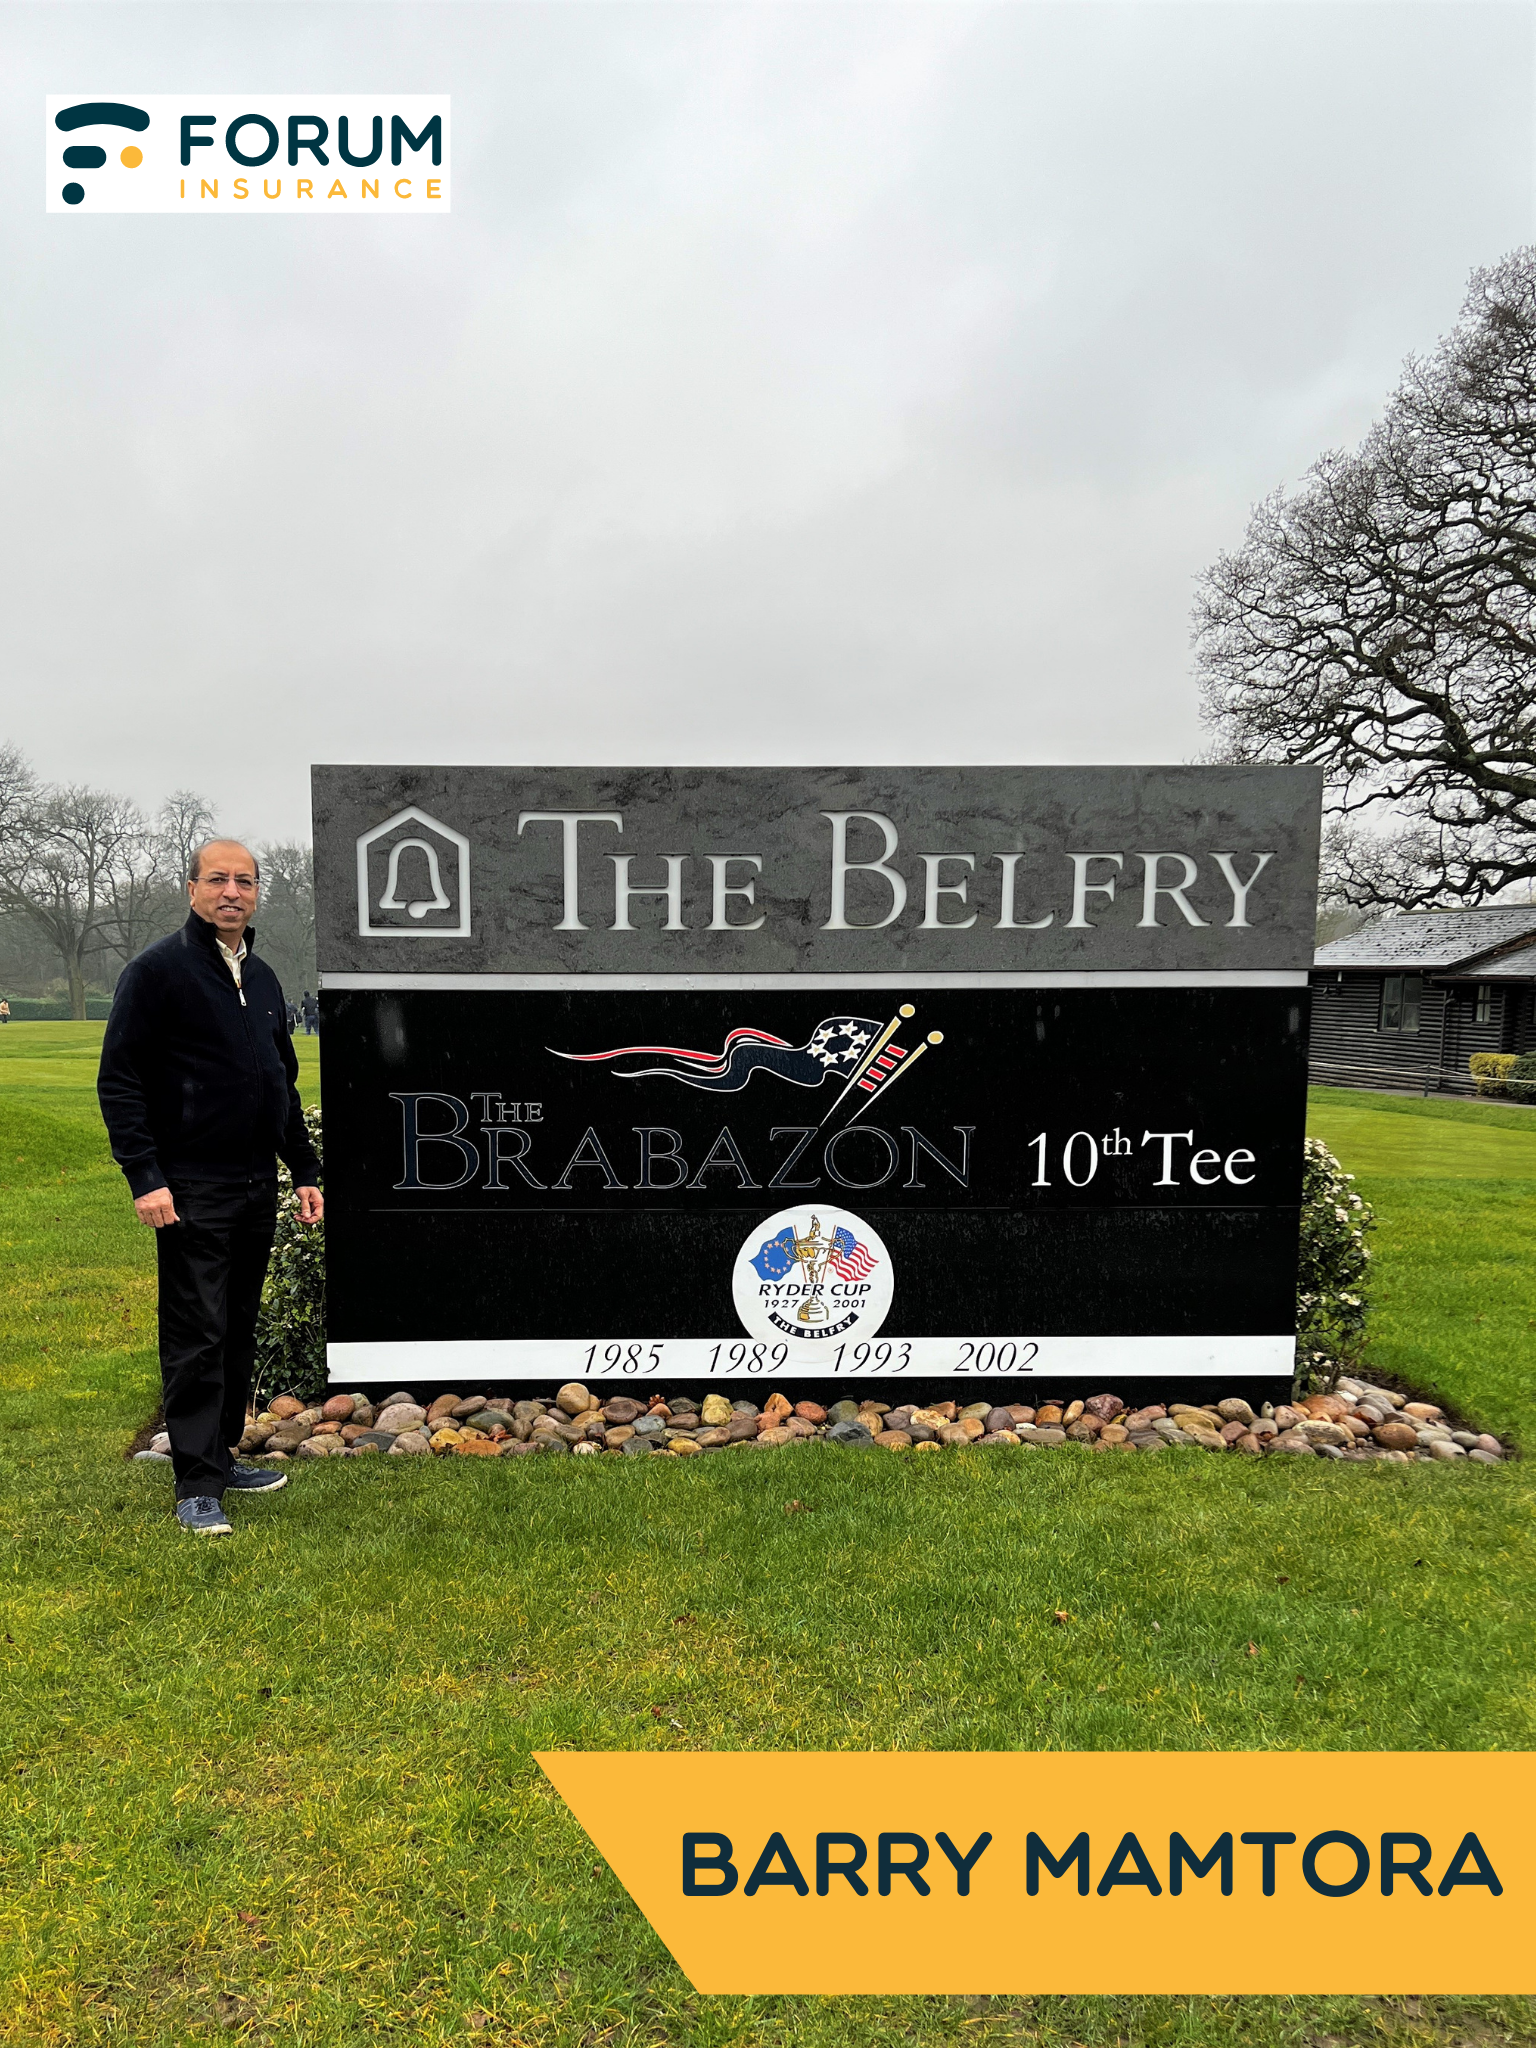 Forum Insurance: The Belfrey: The Brabazon 10th Tee. Ryder Cup 1985, 1989, 1993, 2022. Barry Mamtora standing next to the sign.